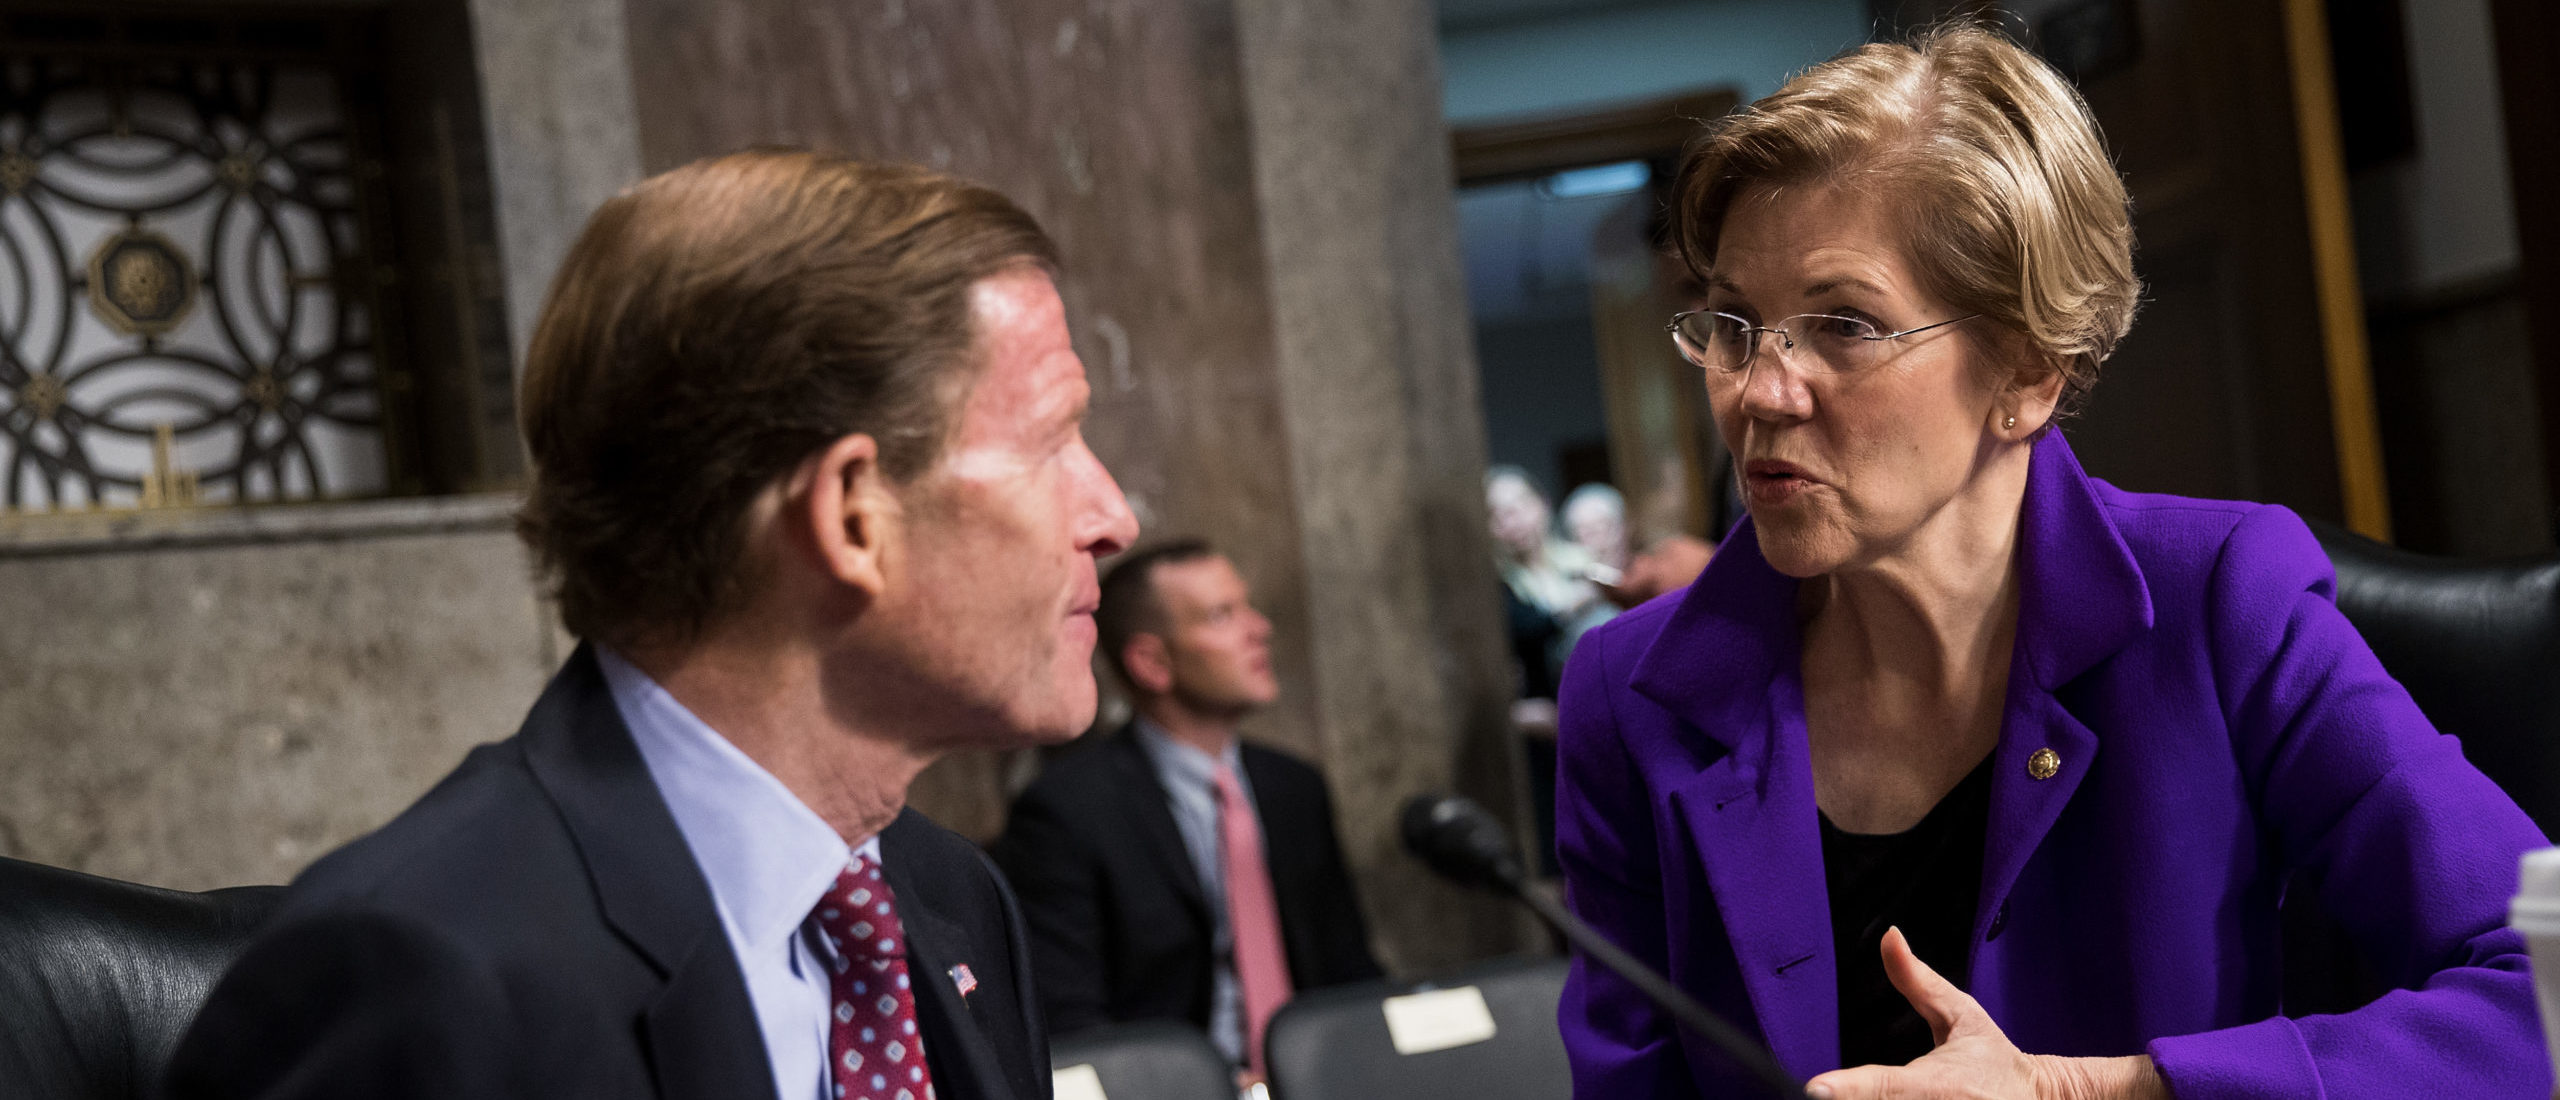 Sen. Richard Blumenthal talks with Sen. Elizabeth Warren (D-MA) before the start of a Senate Armed Services Committee hearing concerning the roles and responsibilities for defending the nation against cyber attacks, on Capitol Hill, October 19, 2017 in Washington, DC. (Photo by Drew Angerer/Getty Images)